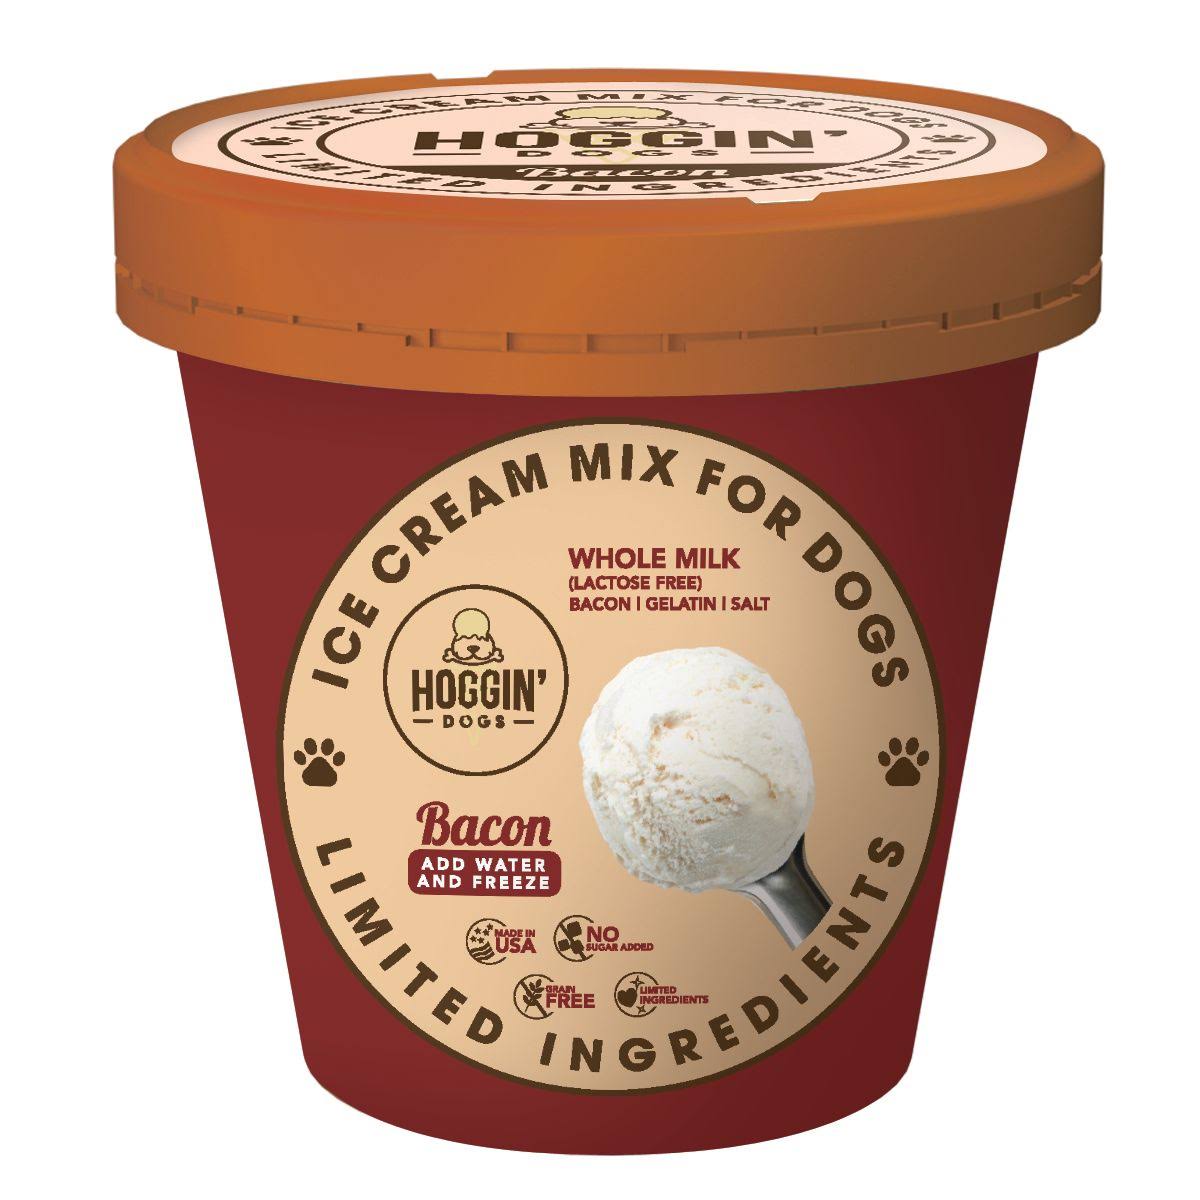 Puppy Cake Hoggin' Dogs Ice Cream Mix for Dogs (Bacon)